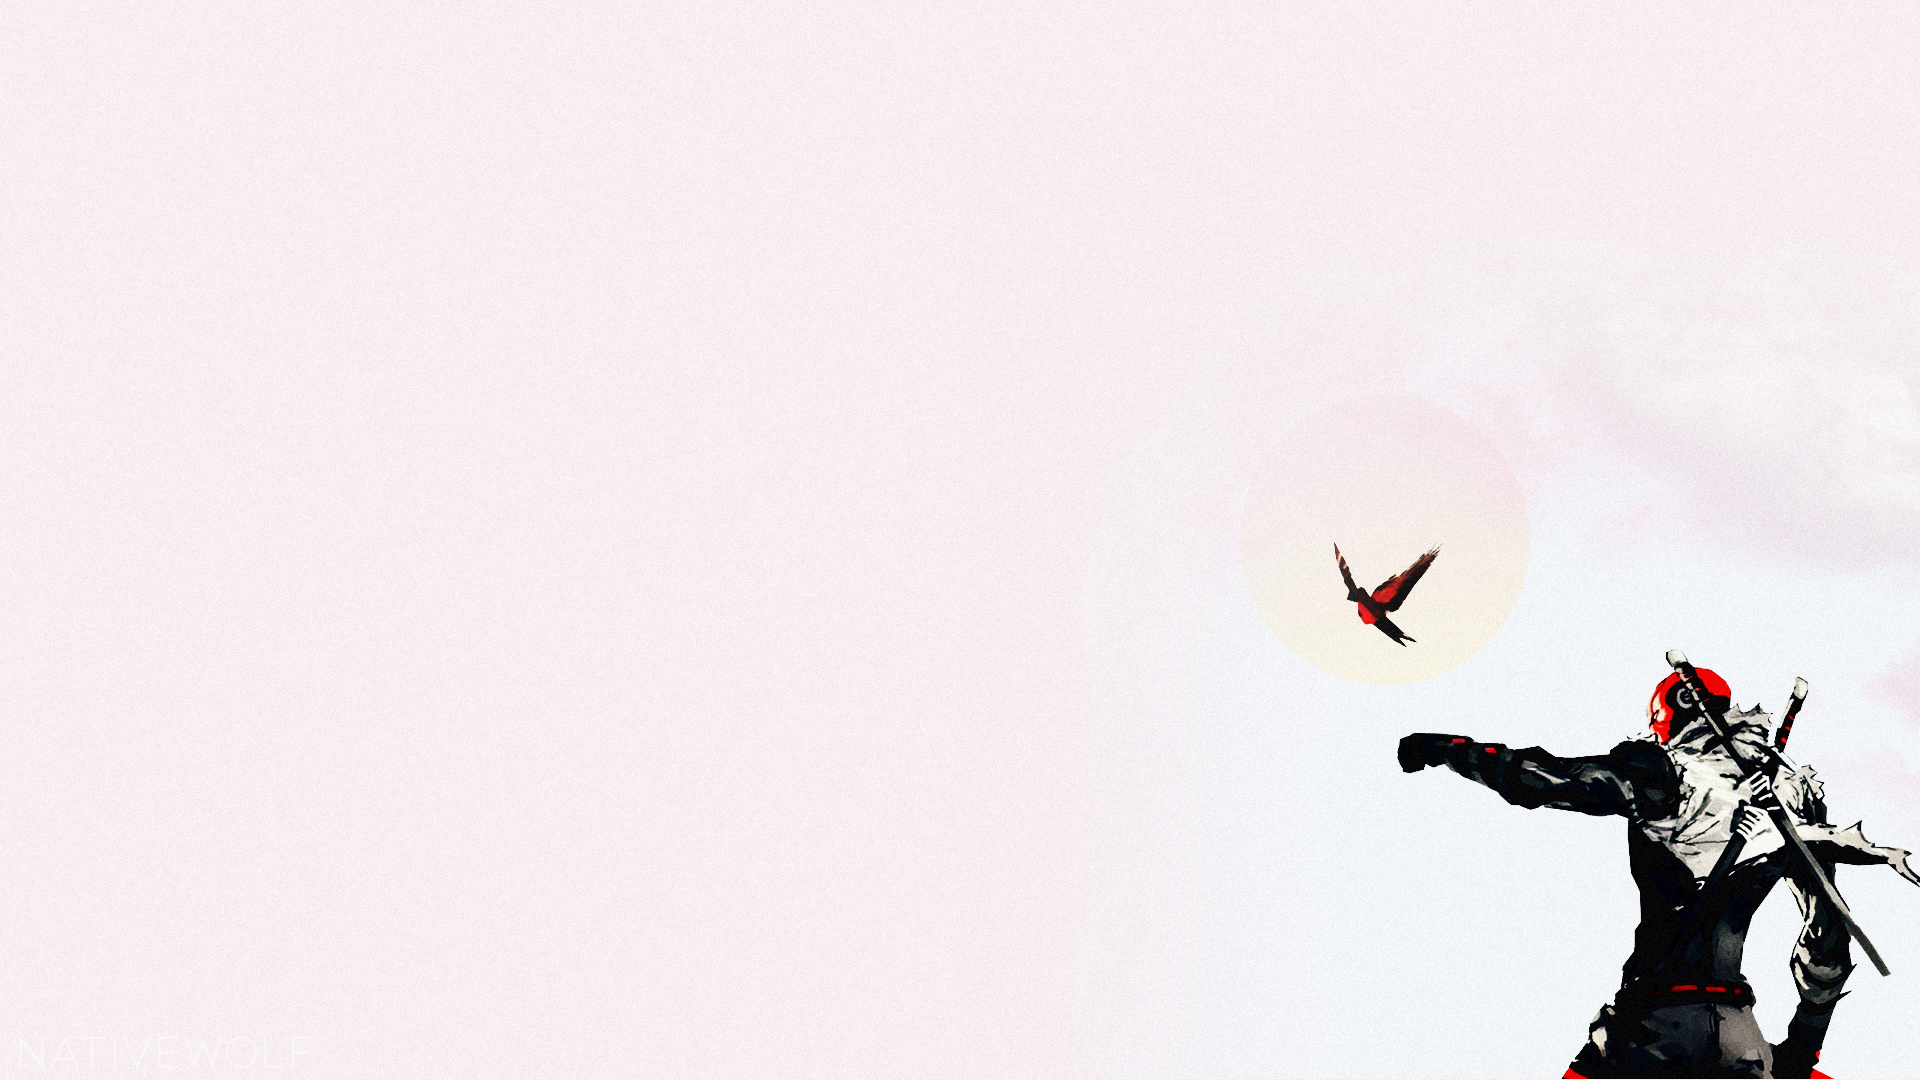 General 1920x1080 Red Hat birds robins painting ninjas solid color colorful sun rays sword helmet cape katana black outfits pixel art flying pink purple Desktopography grain red mask clouds Sun photoshopped 1920 artwork